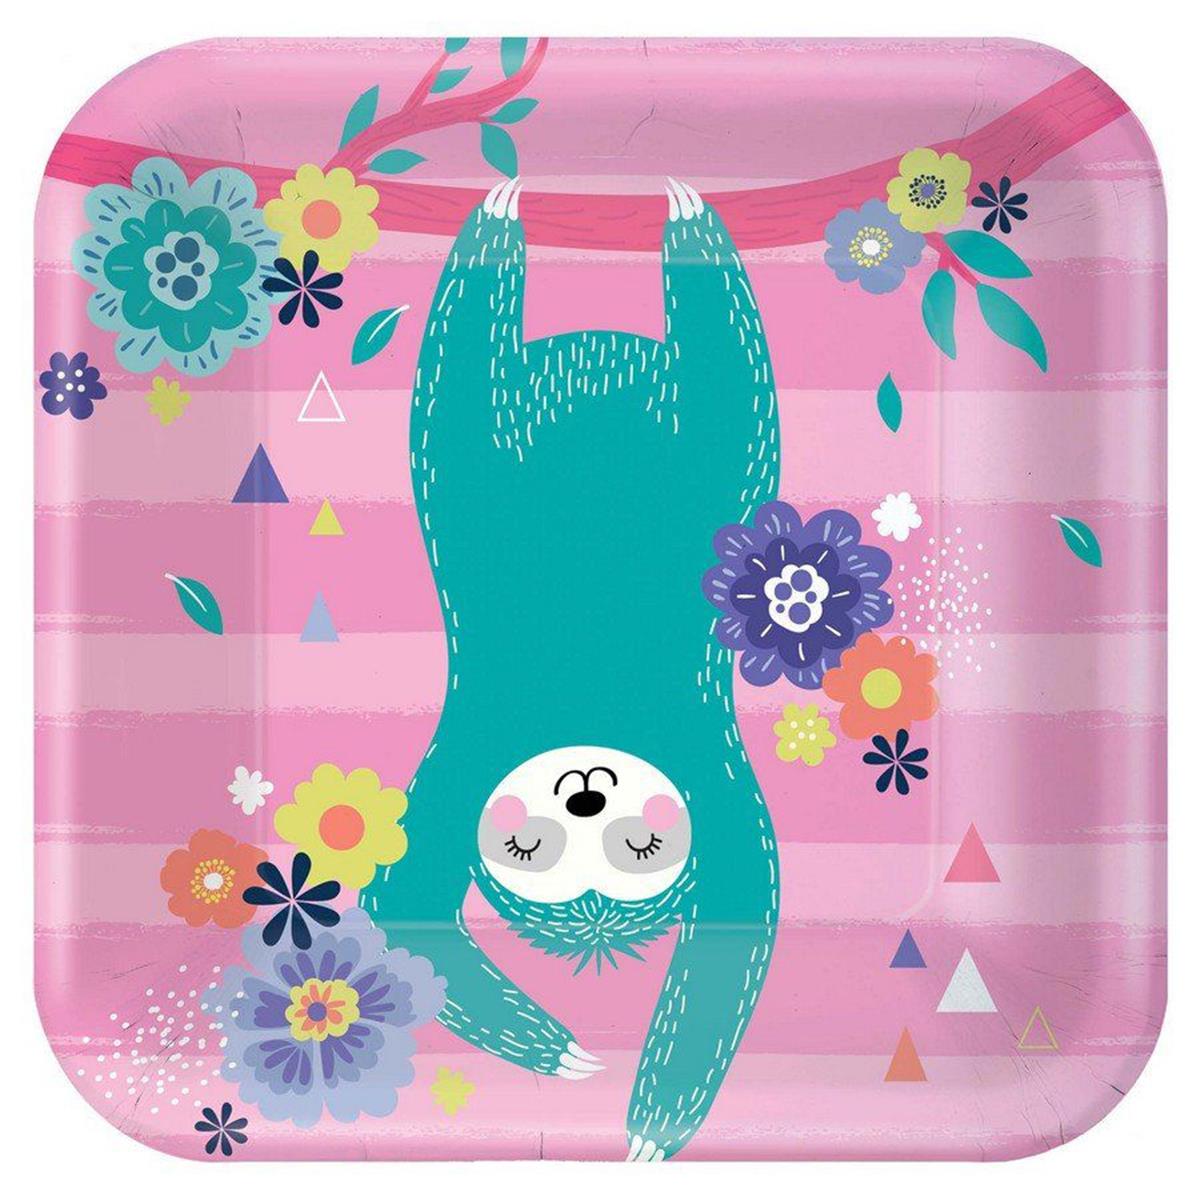 Picture of Amscan 639498 Sloth Celebration Lunch Plate - Pack of 8